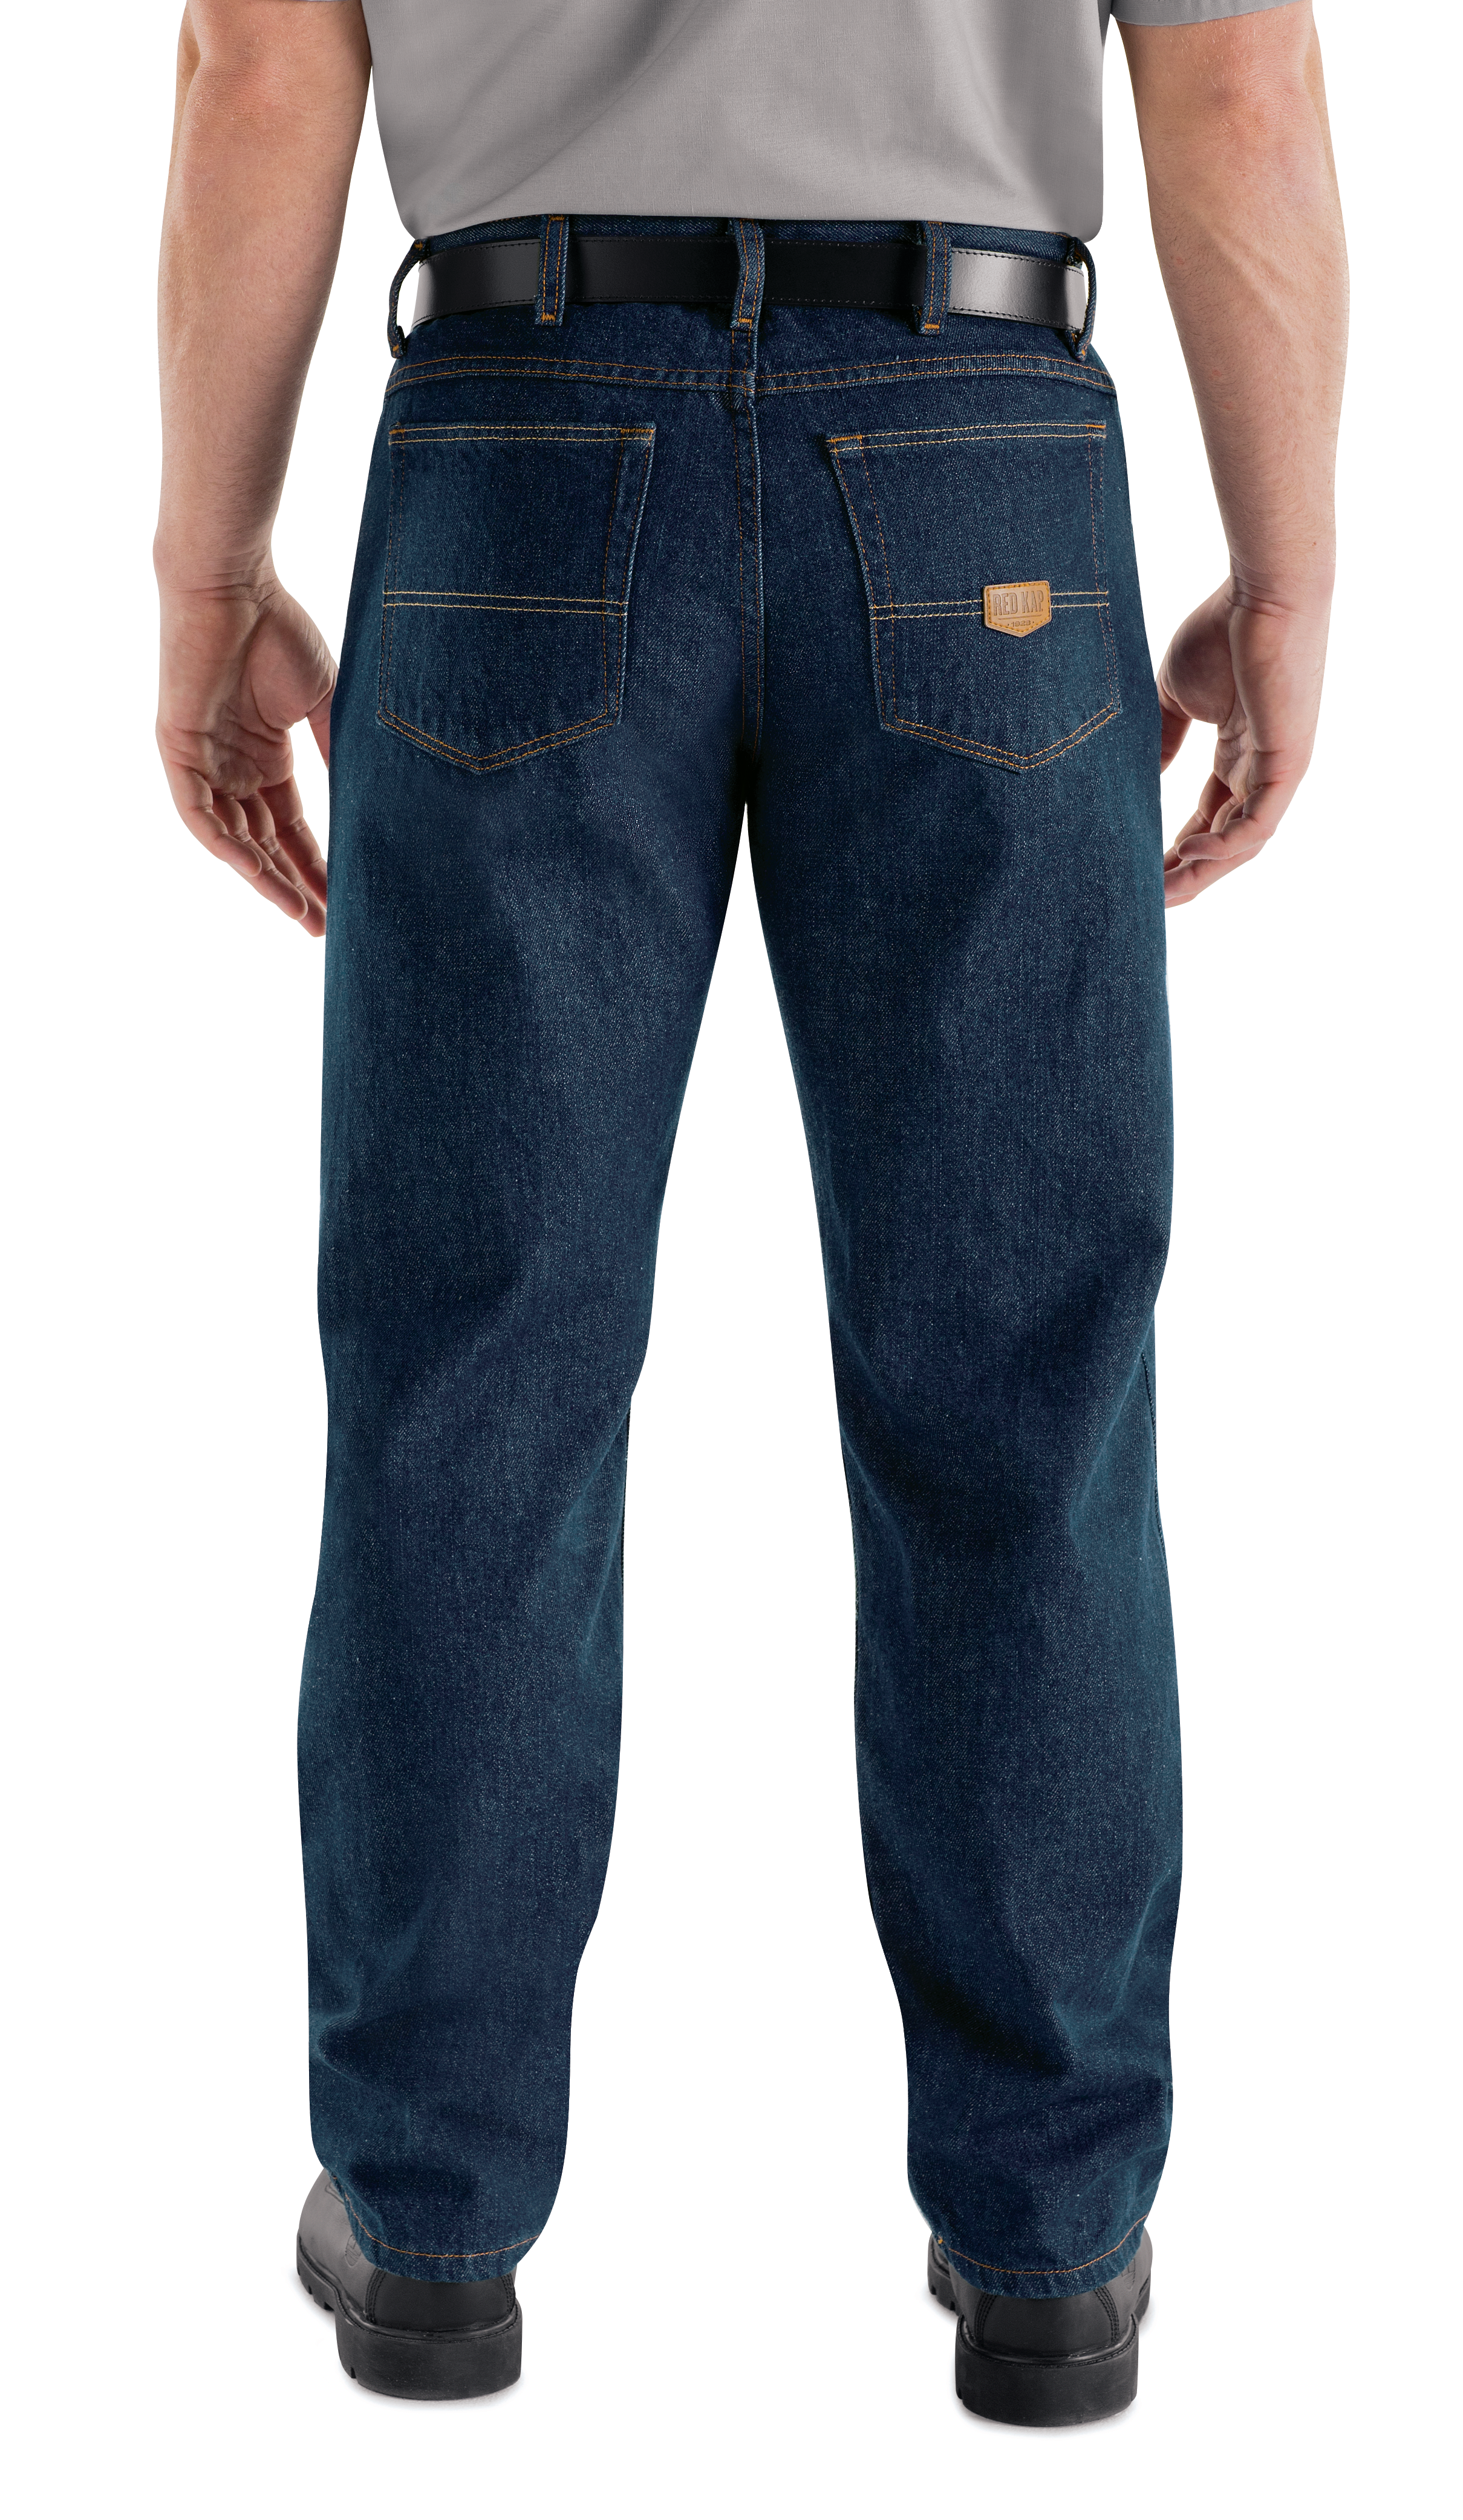 Full Blue Men's 5 Pocket Classic Relaxed Fit Jeans